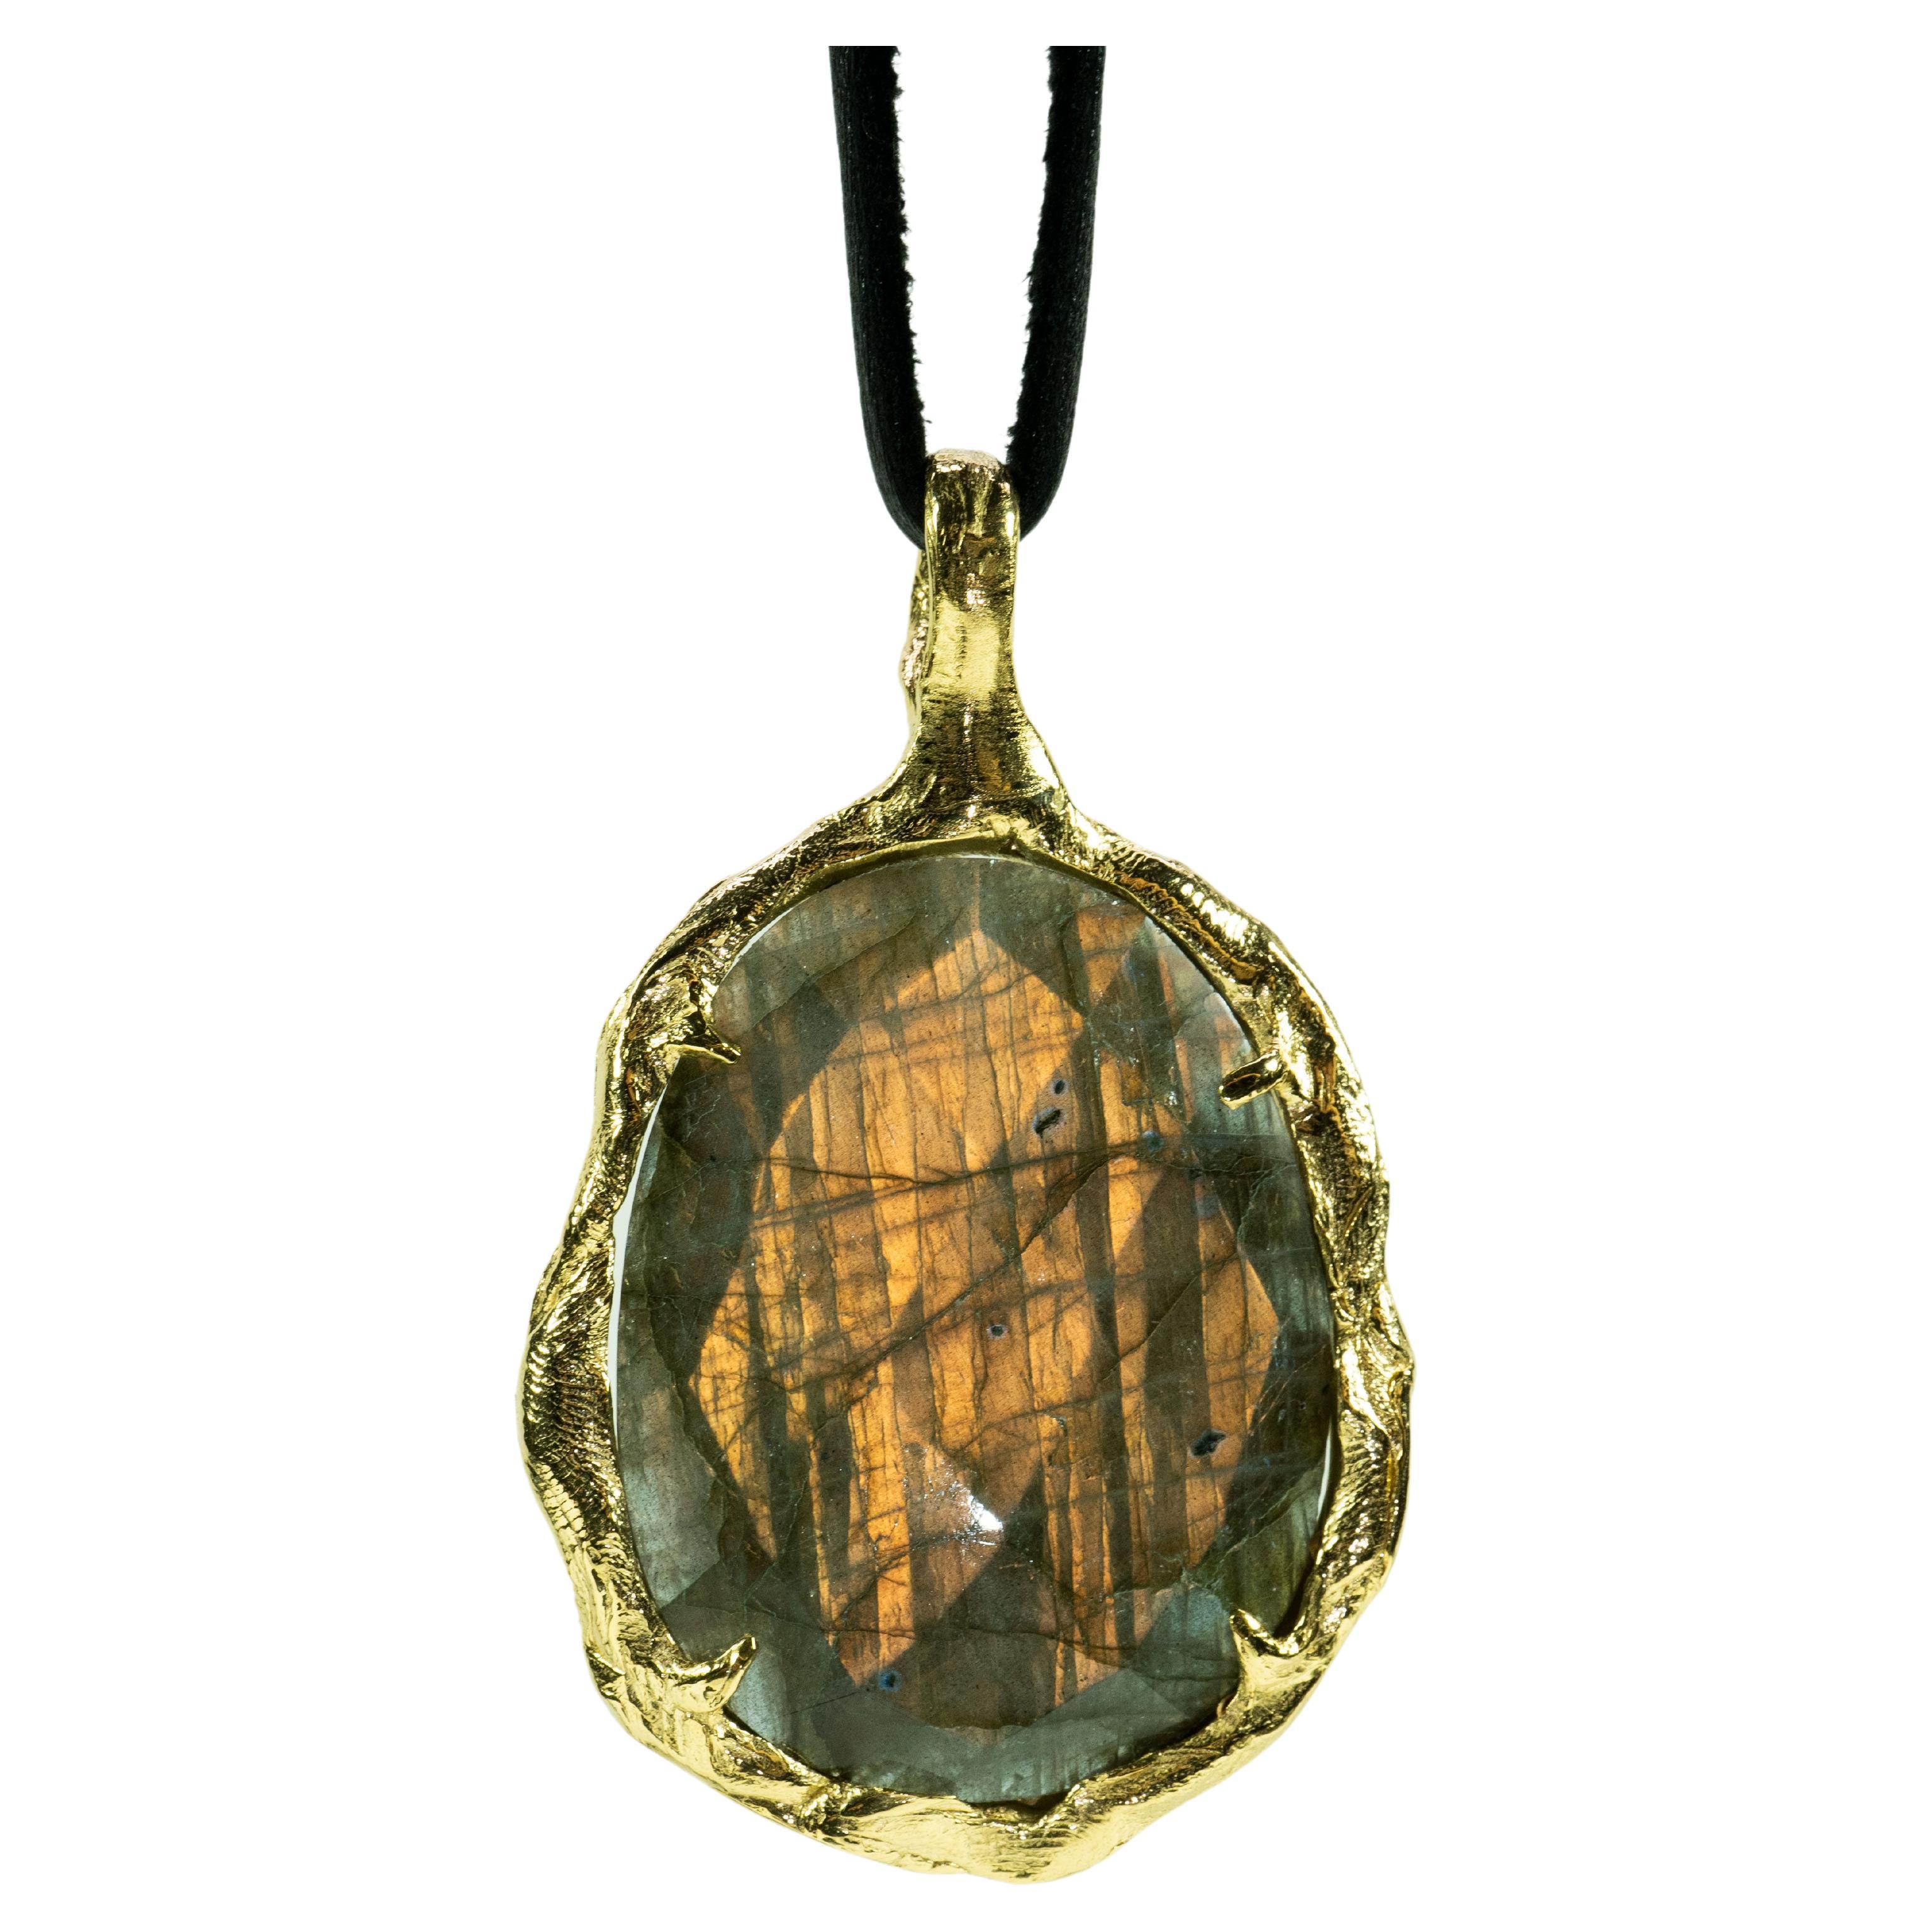 Dual Reality (10K Gold Plated, Labradorite Pendant) by Ken Fury For Sale